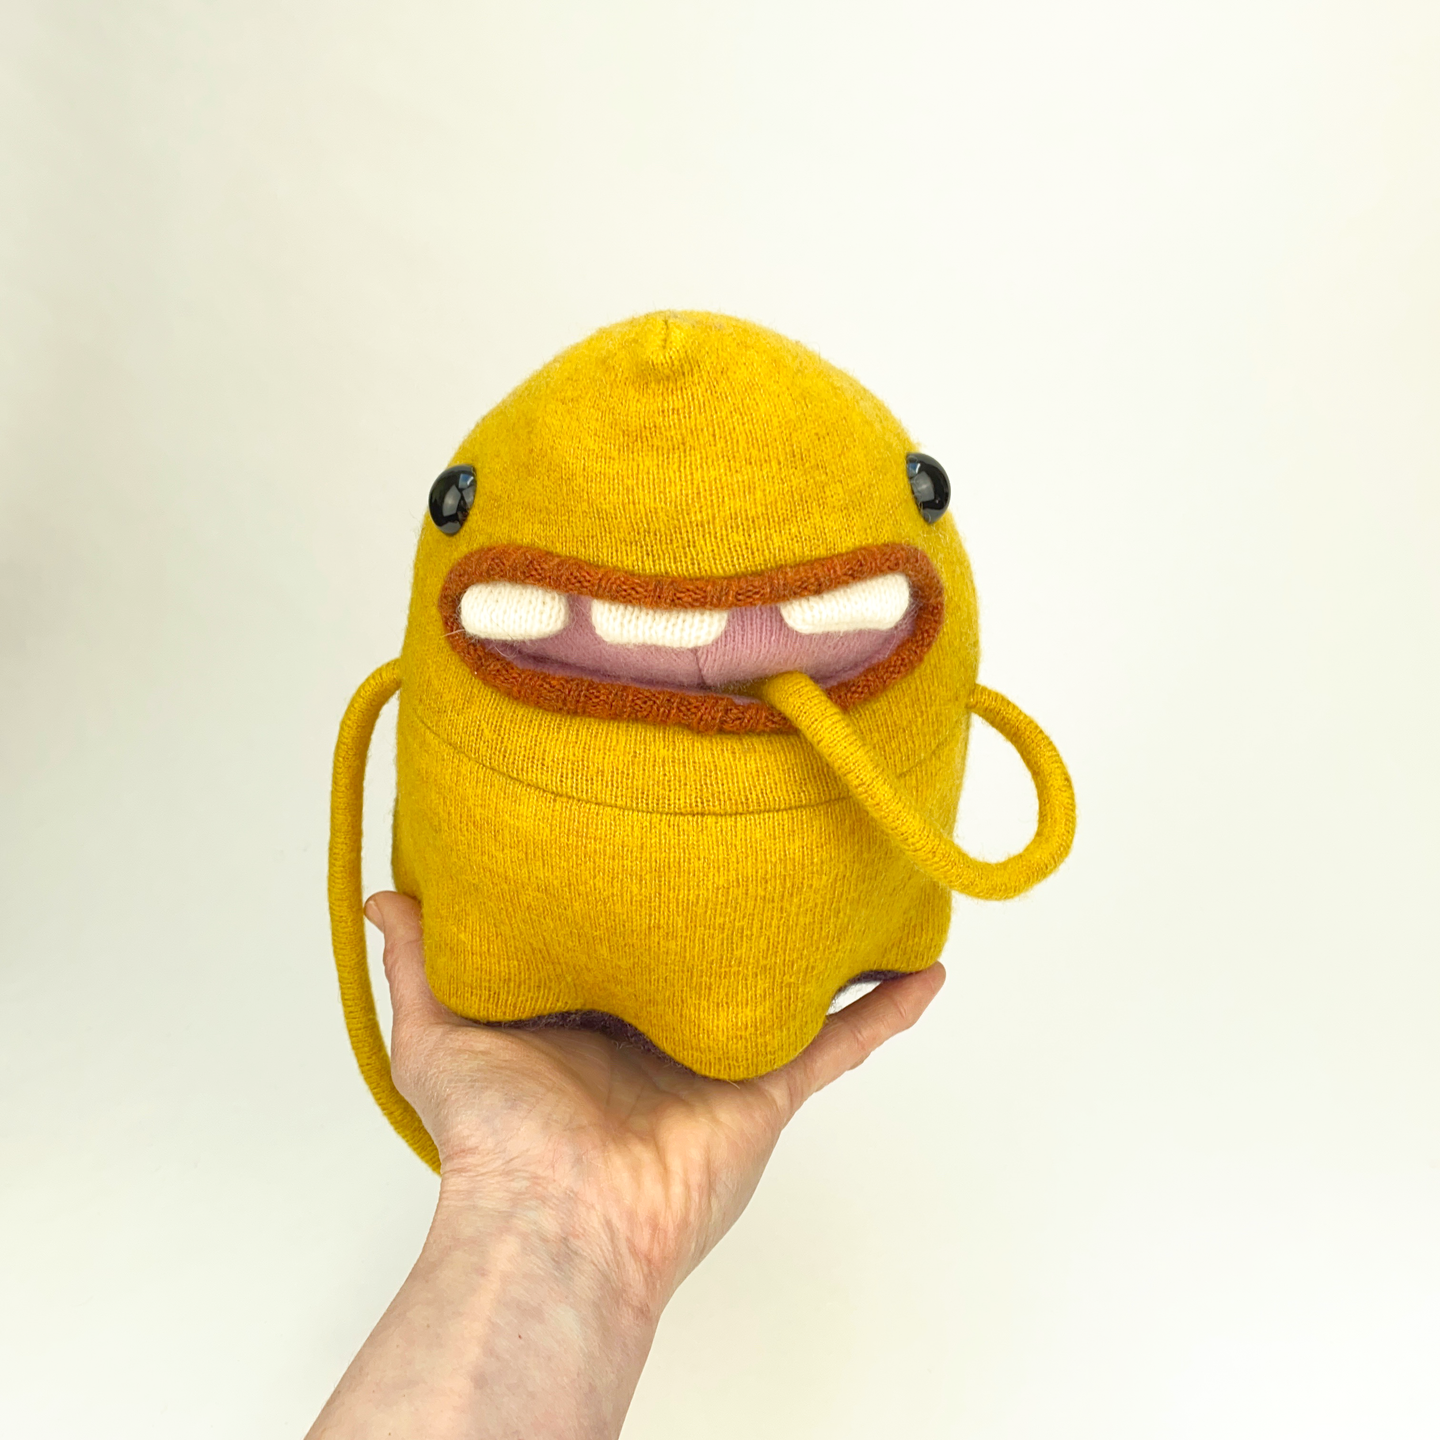 Fred the yellow plush my friend monster™